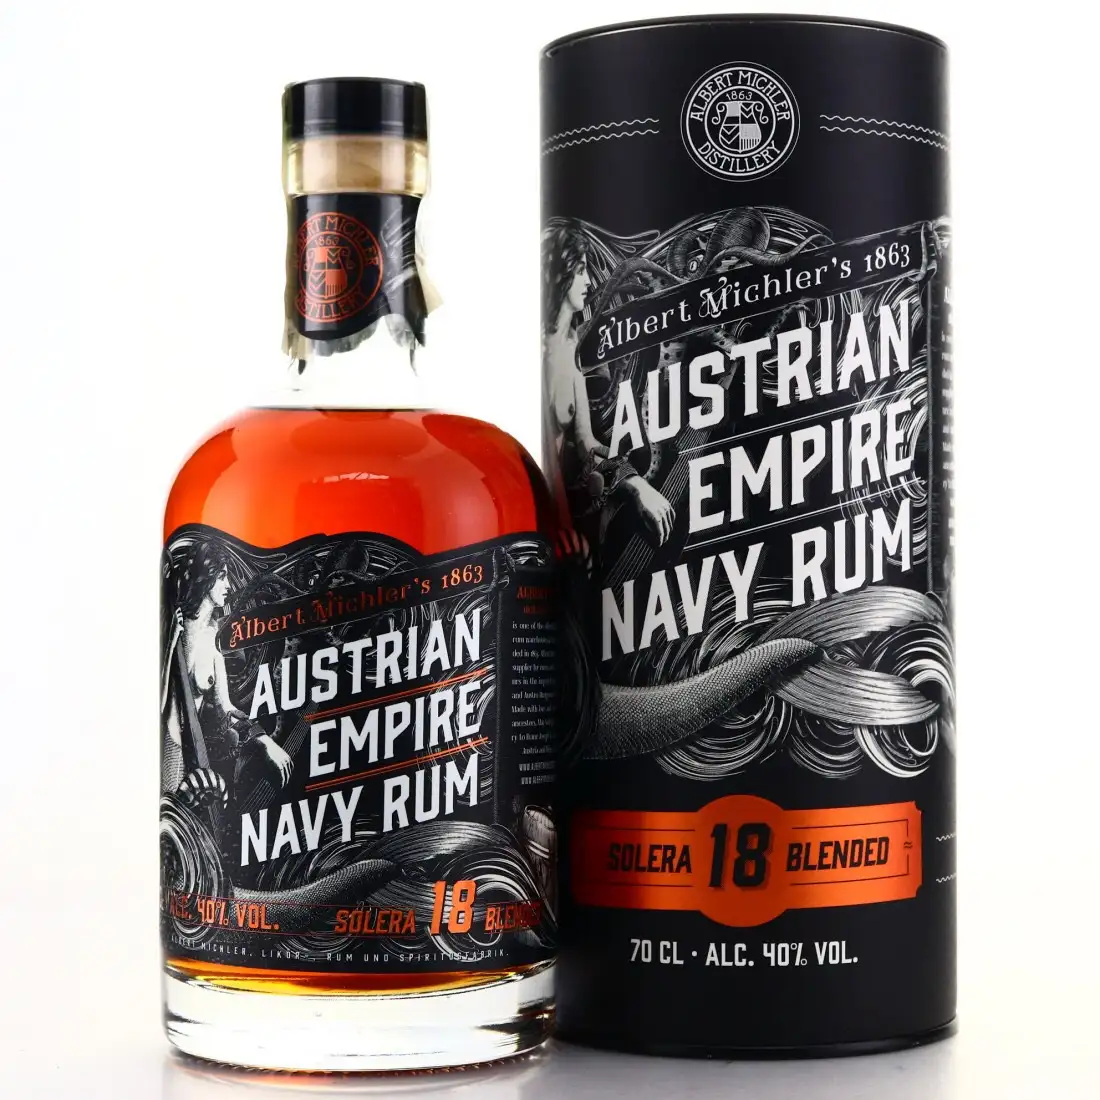 Image of the front of the bottle of the rum Austrian Empire Navy Rum Solera 18